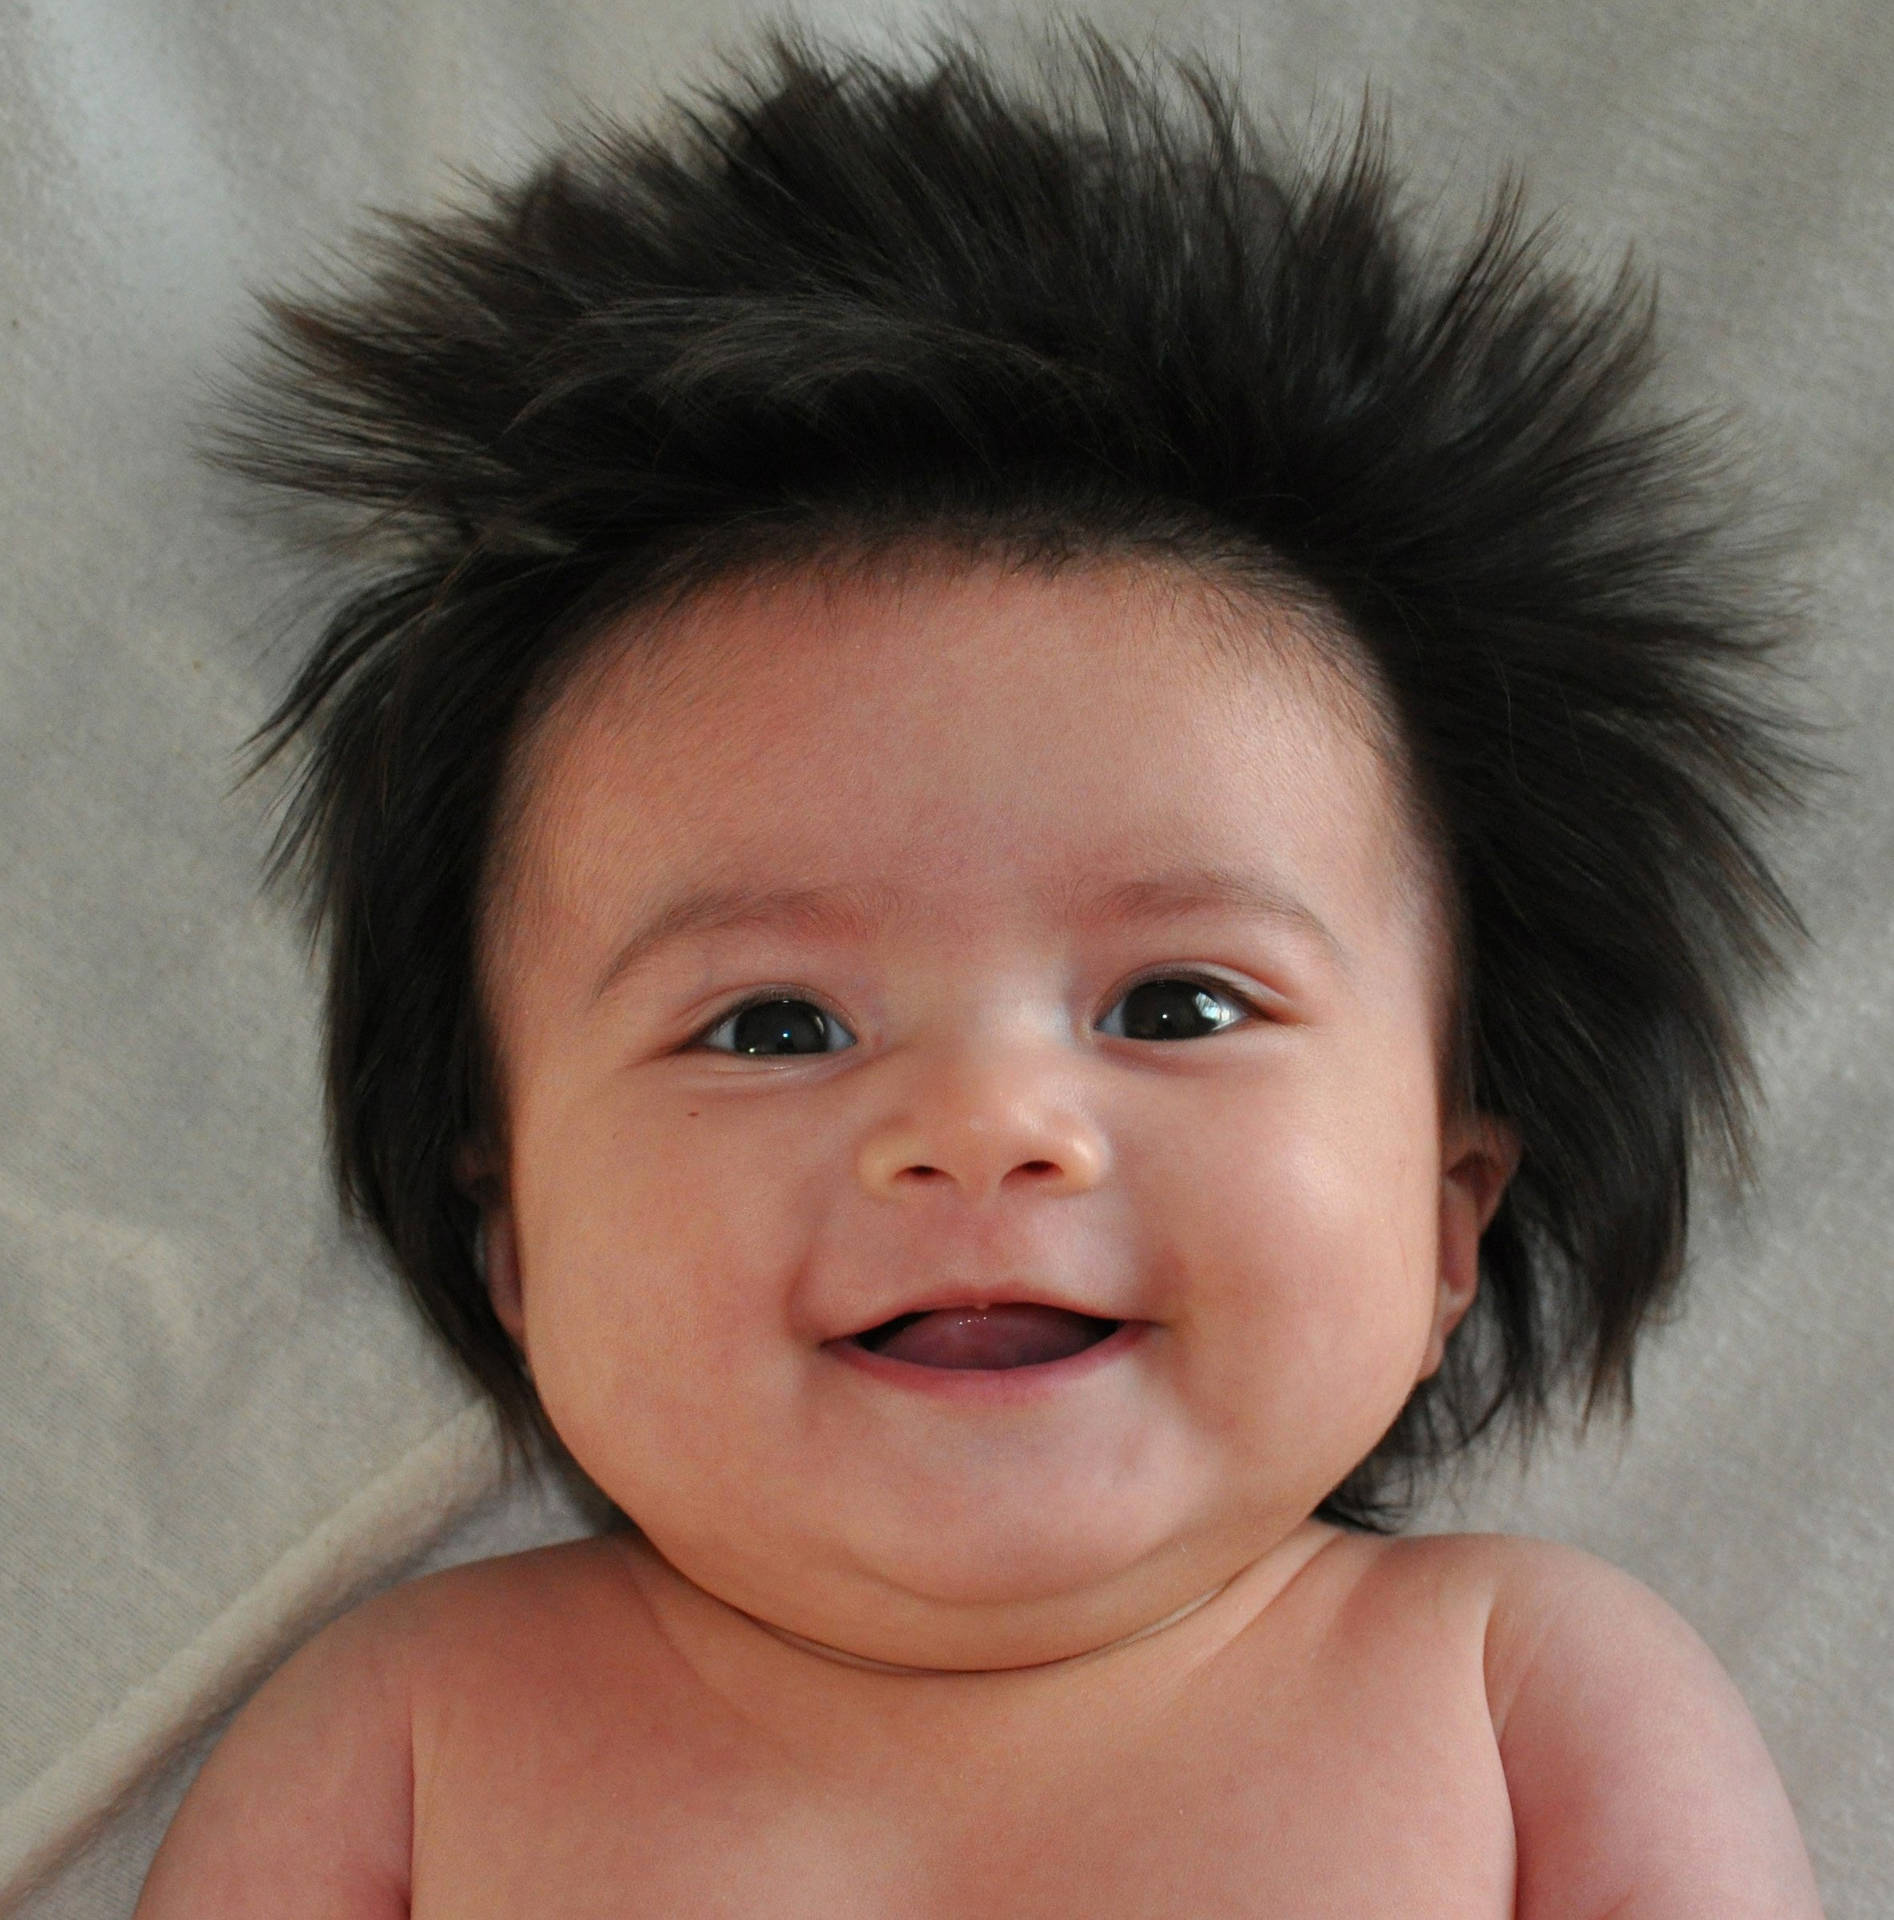 Charming Cuteness Overload: Hairy Funny Baby Wallpaper